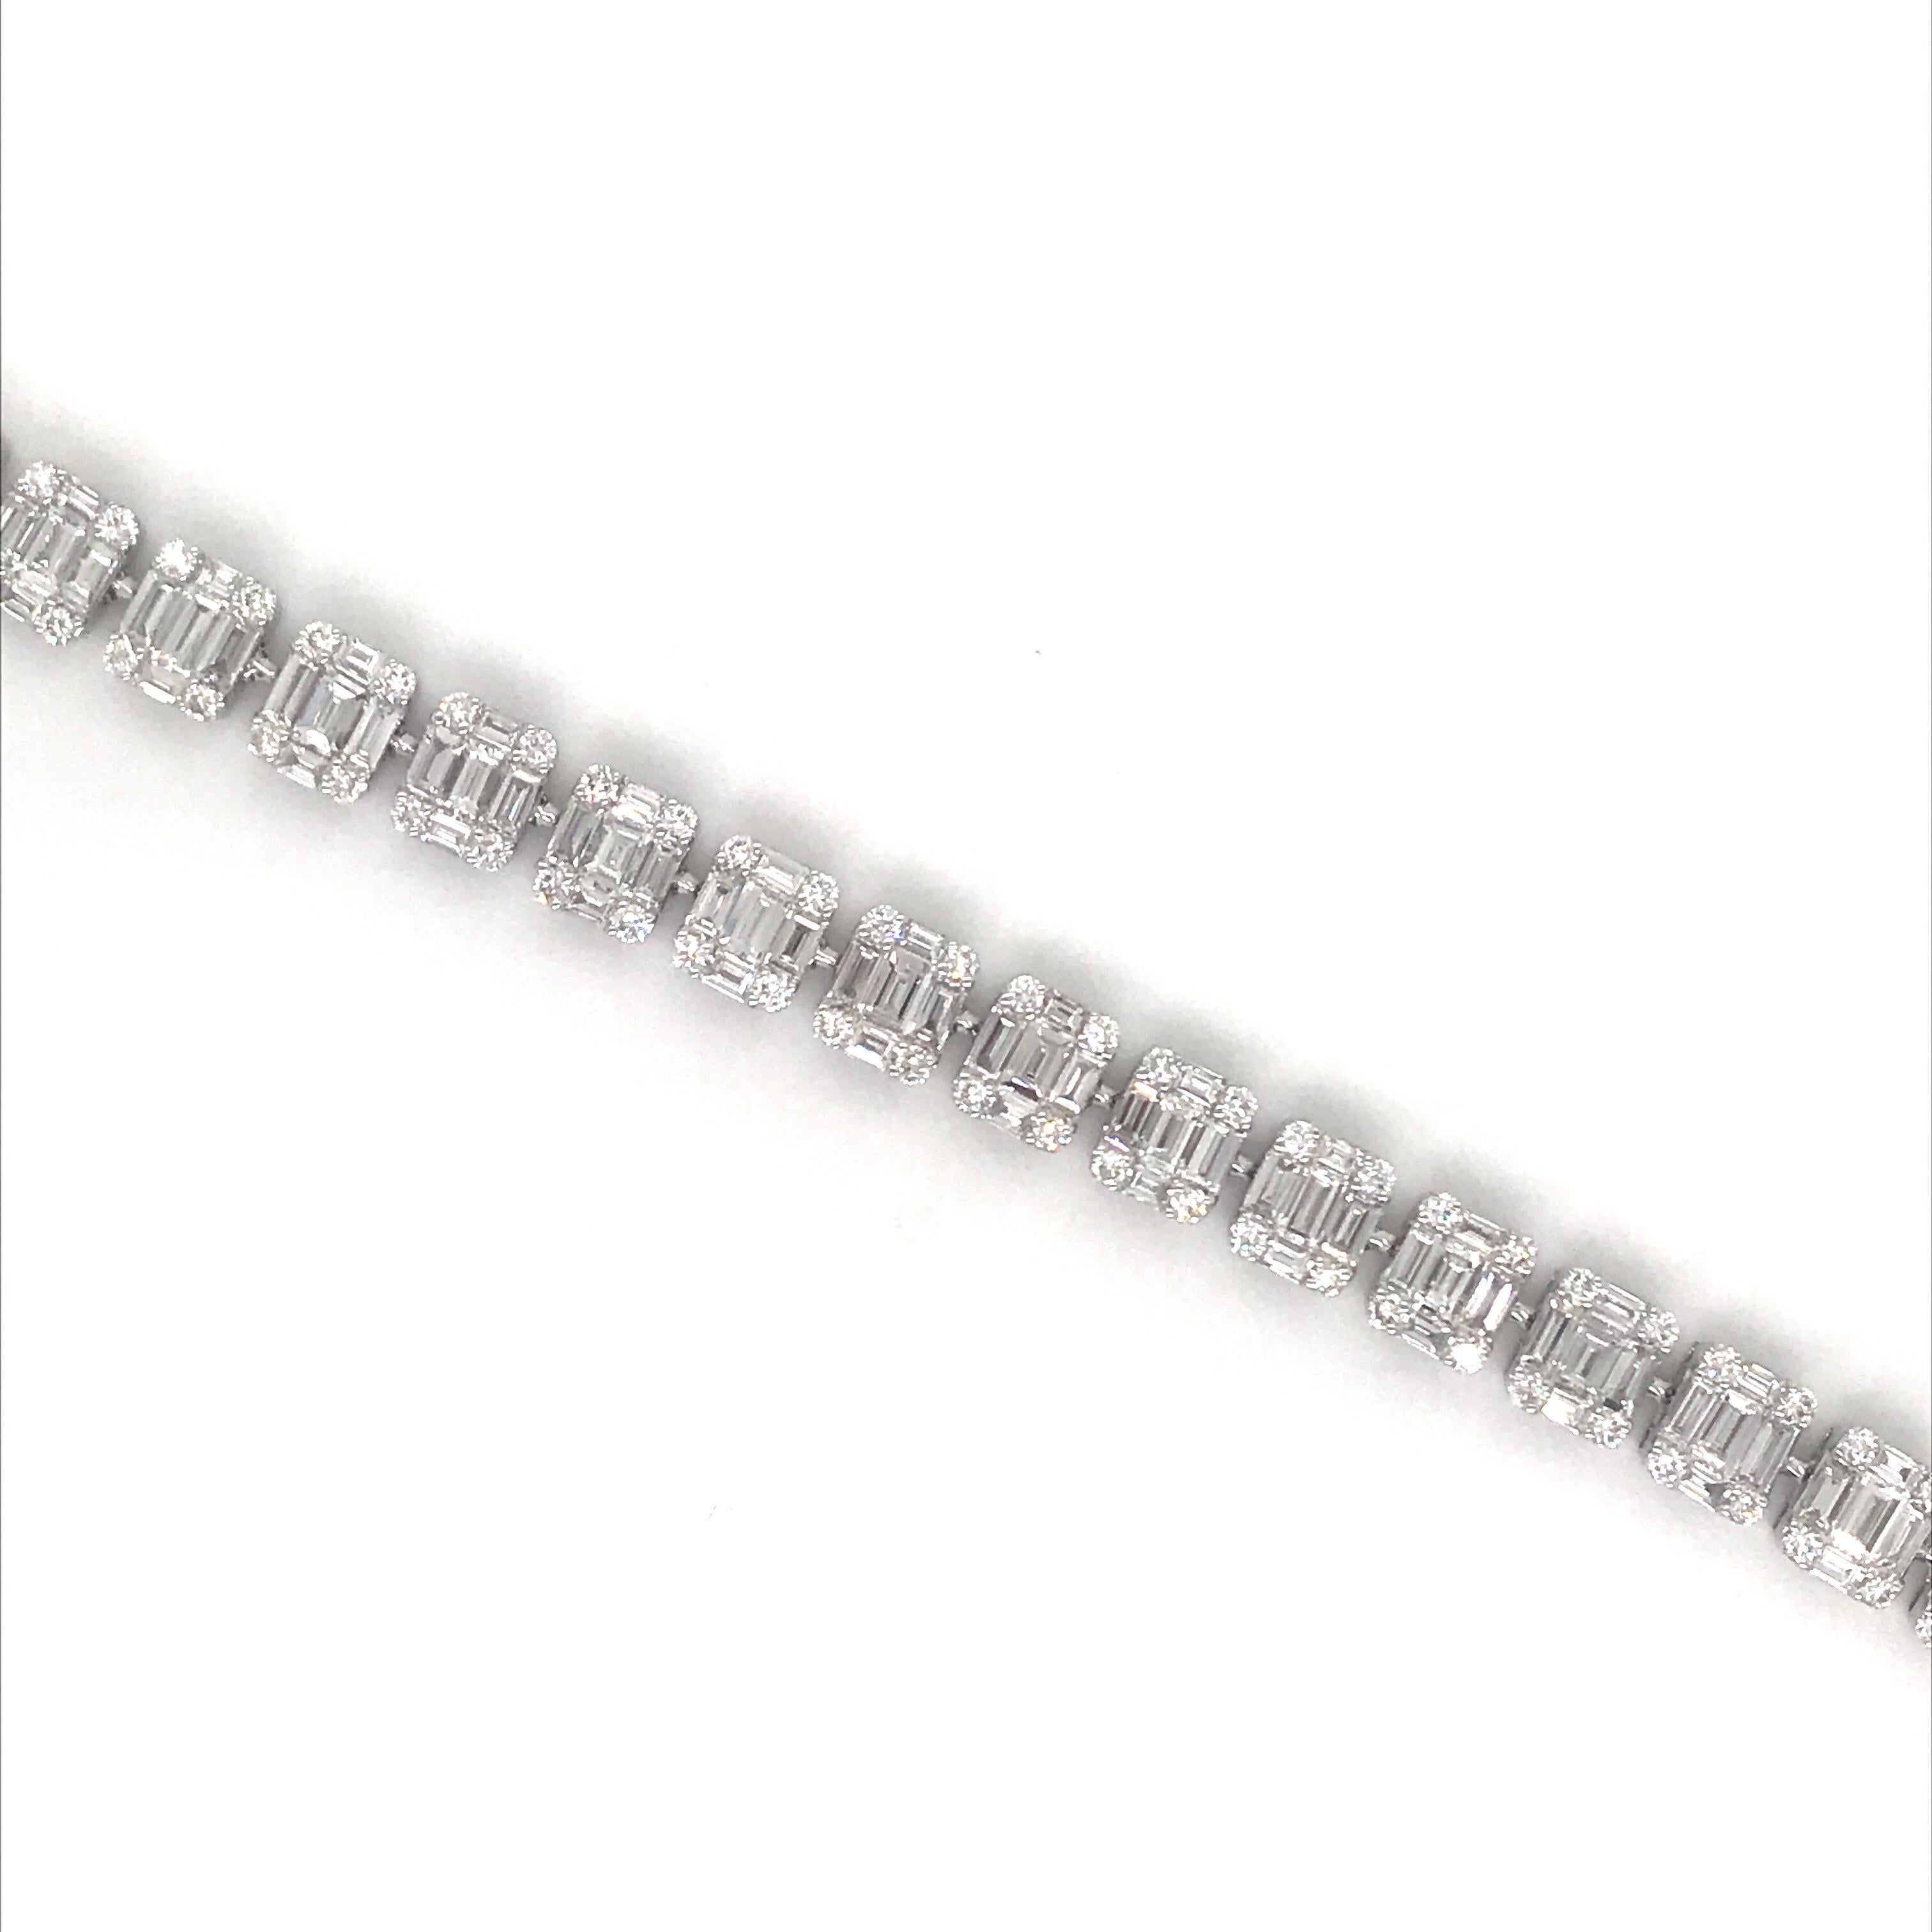 18K White gold illusion tennis bracelet featuring 135 baguette diamonds weighing 6.09 carats surrounded by 108 round brilliants weighing 1.57 carats.
Color G-H
Clarity SI